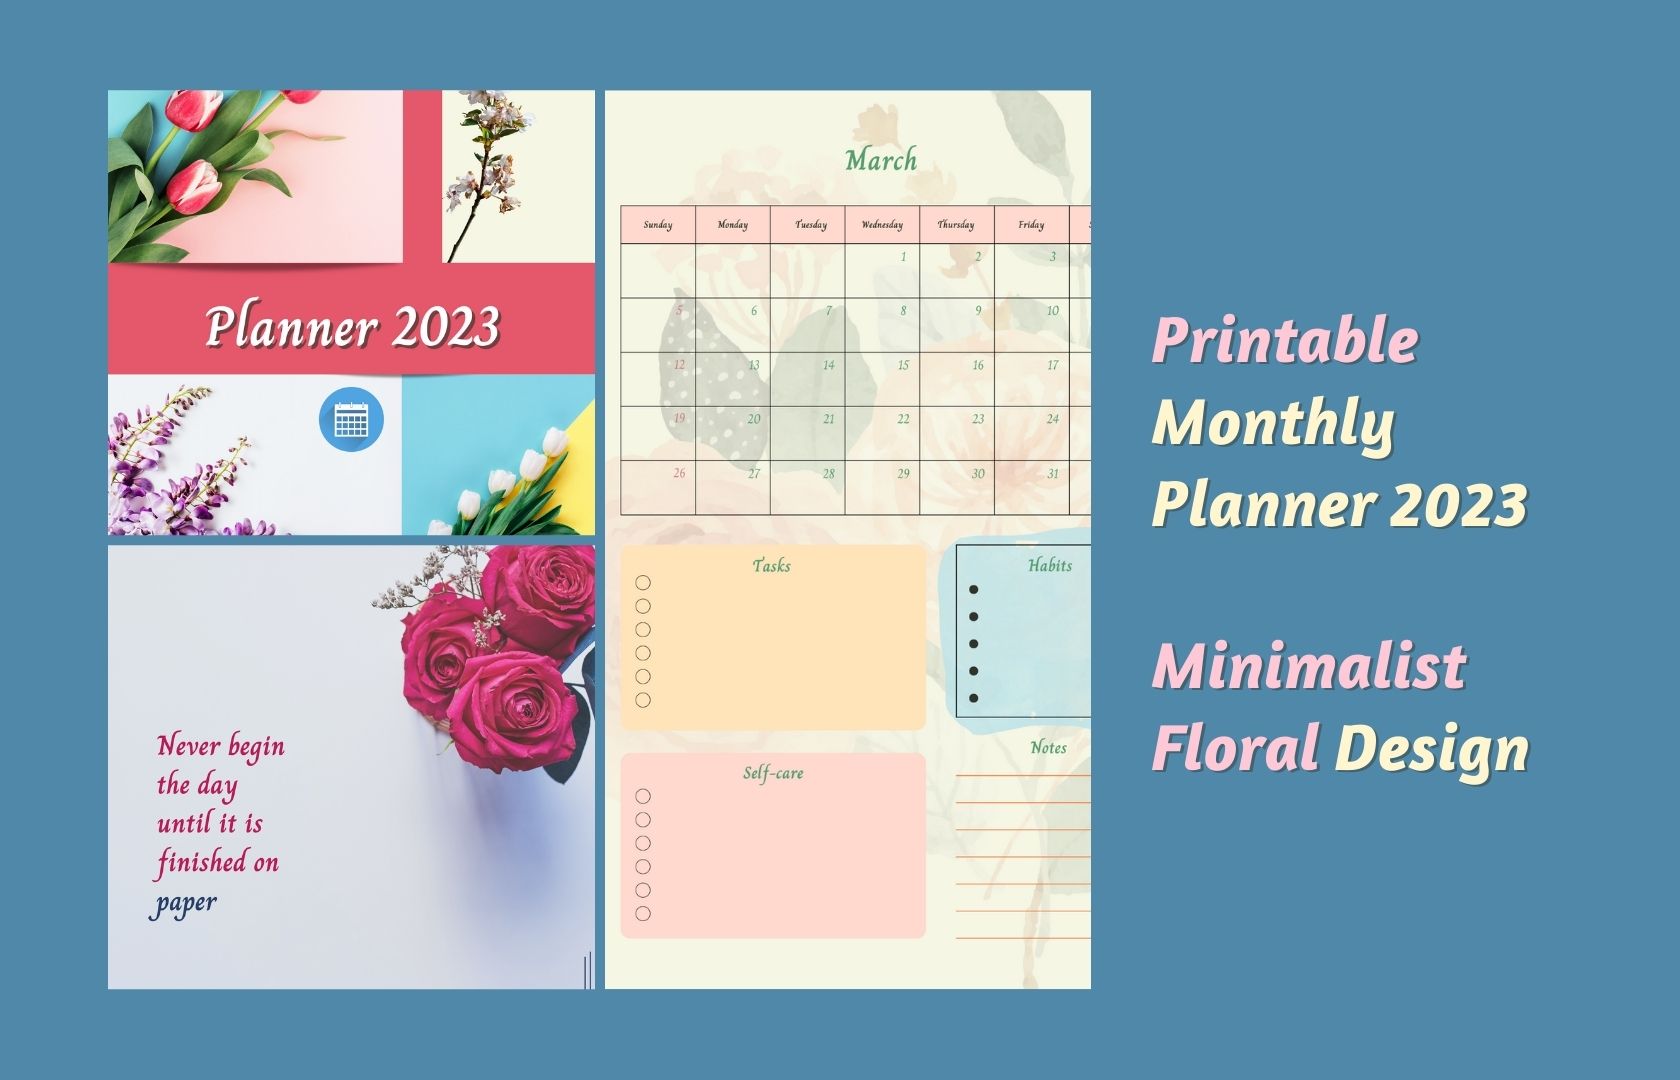 Planner with flowers and a blue background.